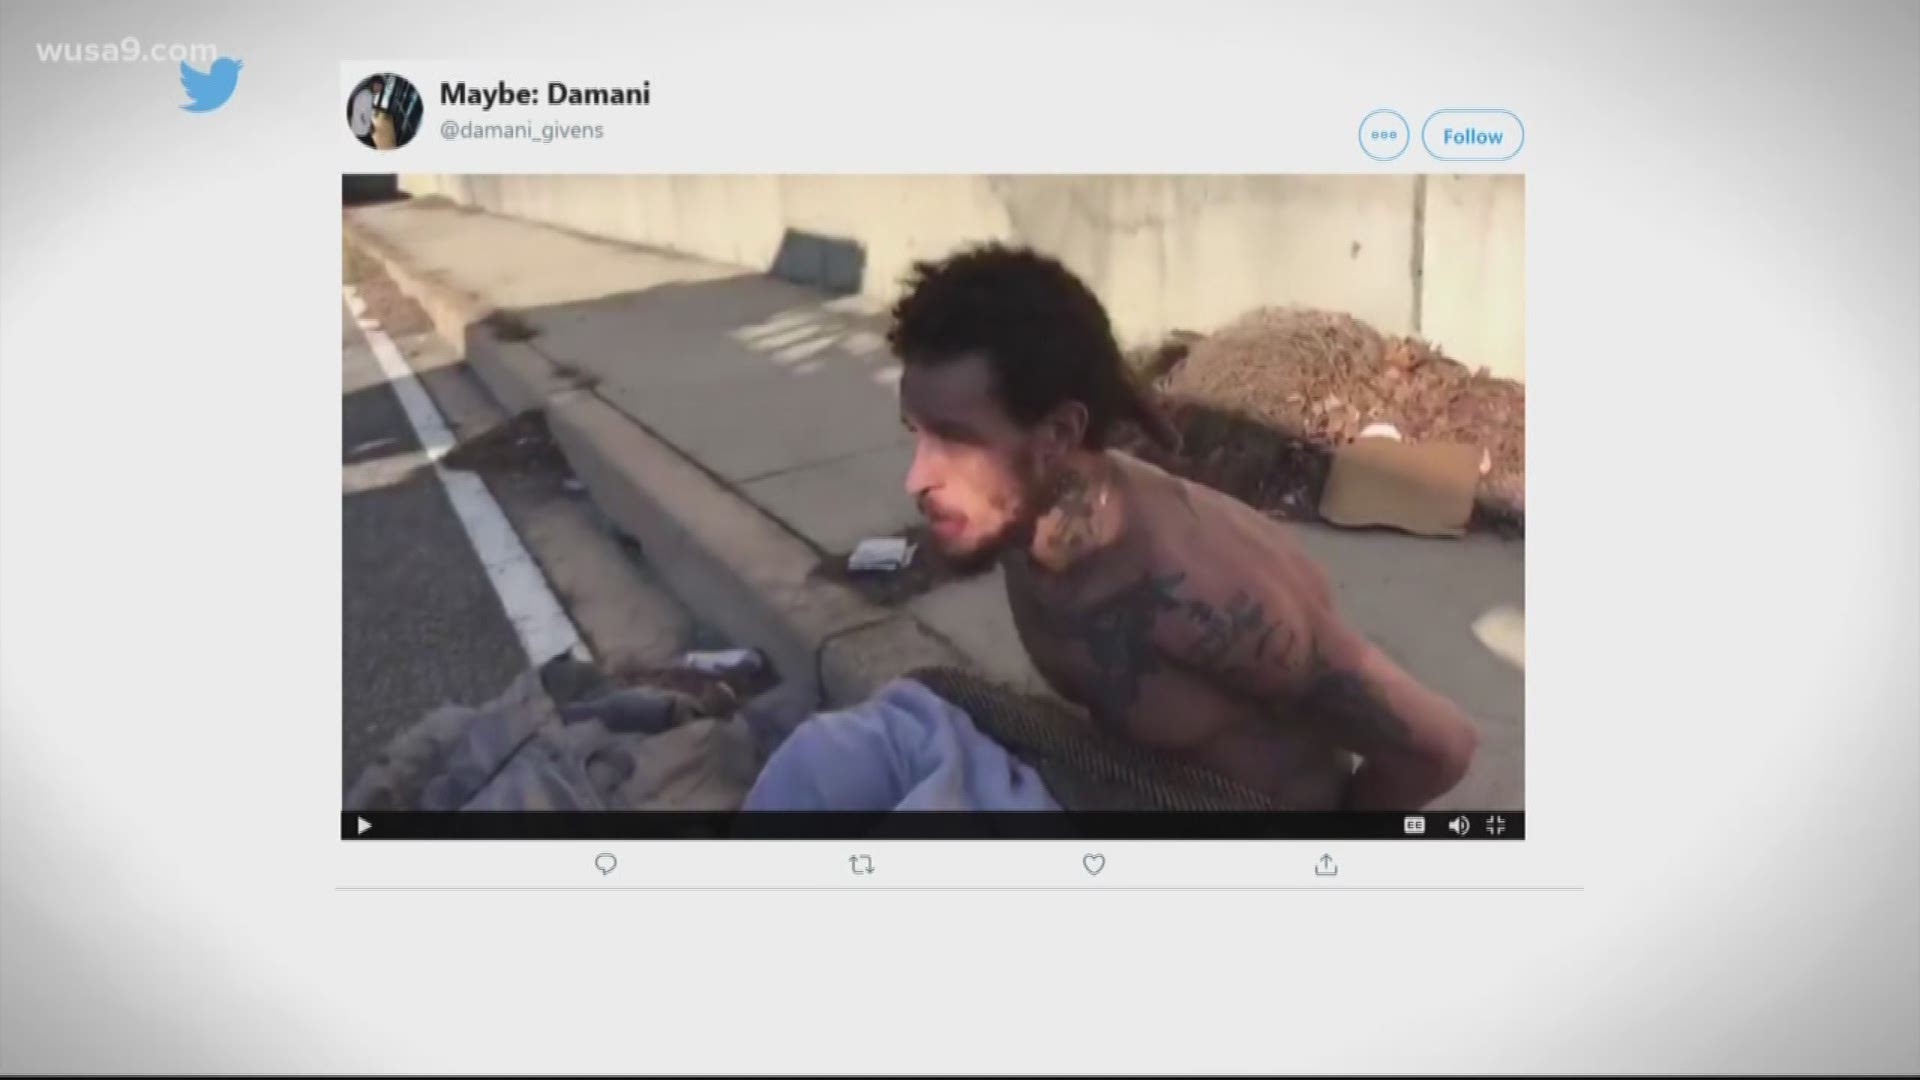 The video surfaced on twitter and showed West being questioned by police following an assault in Oxon Hill, Md.